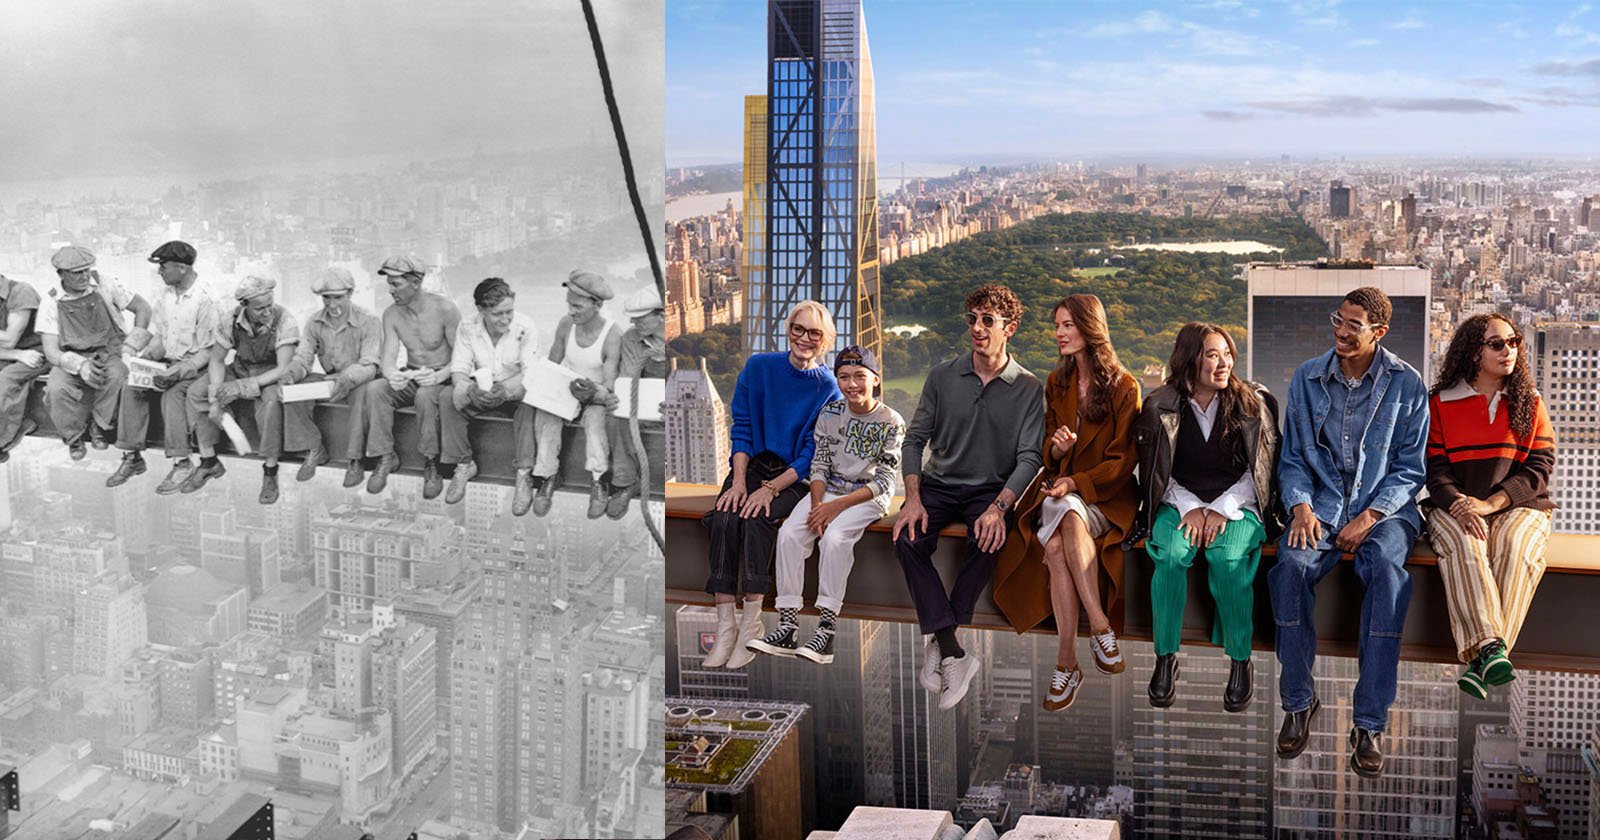 New York Attraction Recreates Famous Construction Worker Photo